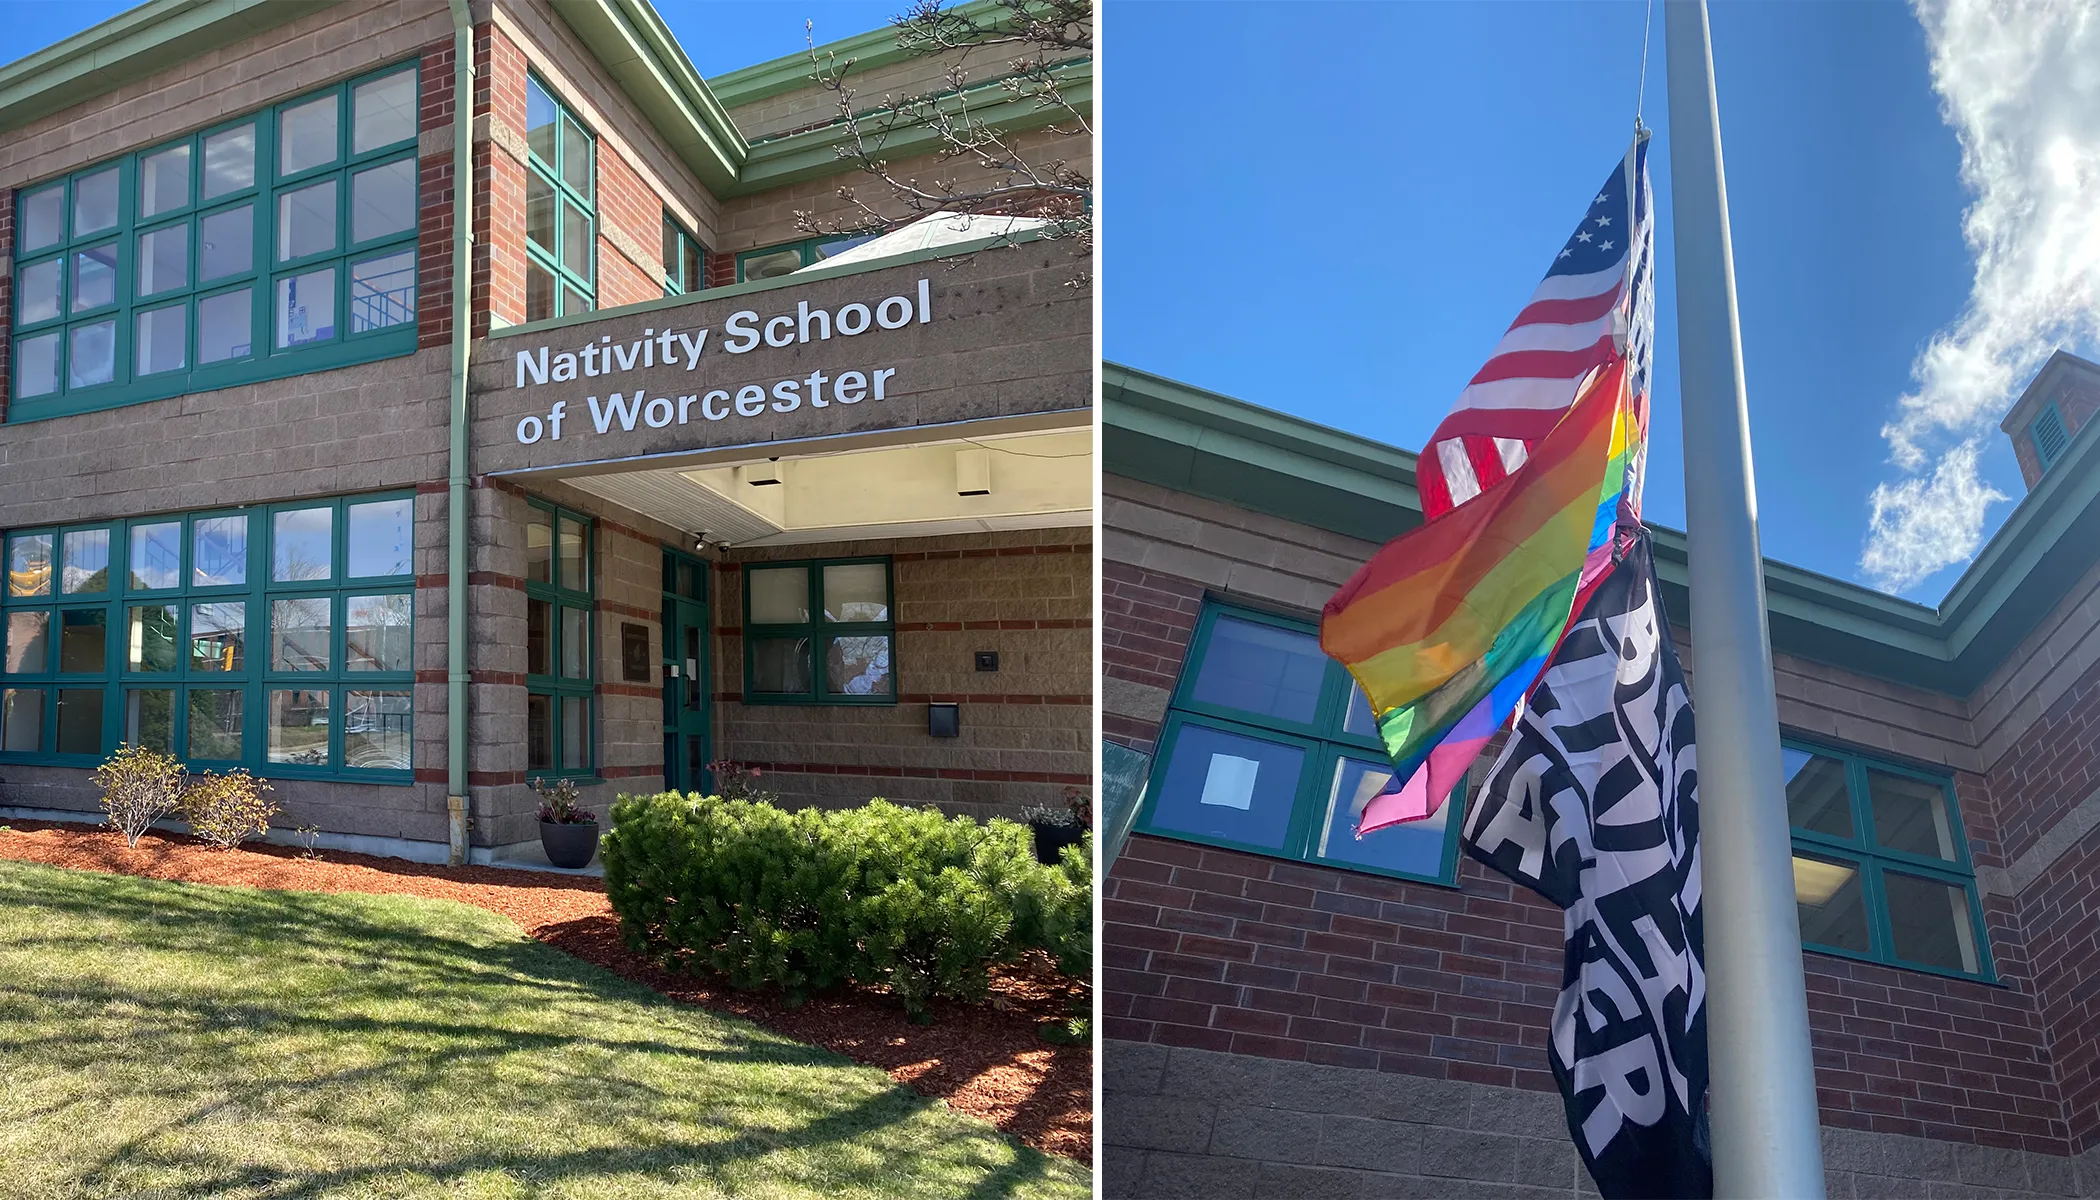 Nativity School of Worcester, a Jesuit middle school in the diocese of Worcester is risking its Catholic status by refusing to remove a gay pride flag and a Black Lives Matter flag from its flag pole, per the request of the local ordinary, Bishop Robert McManus.?w=200&h=150